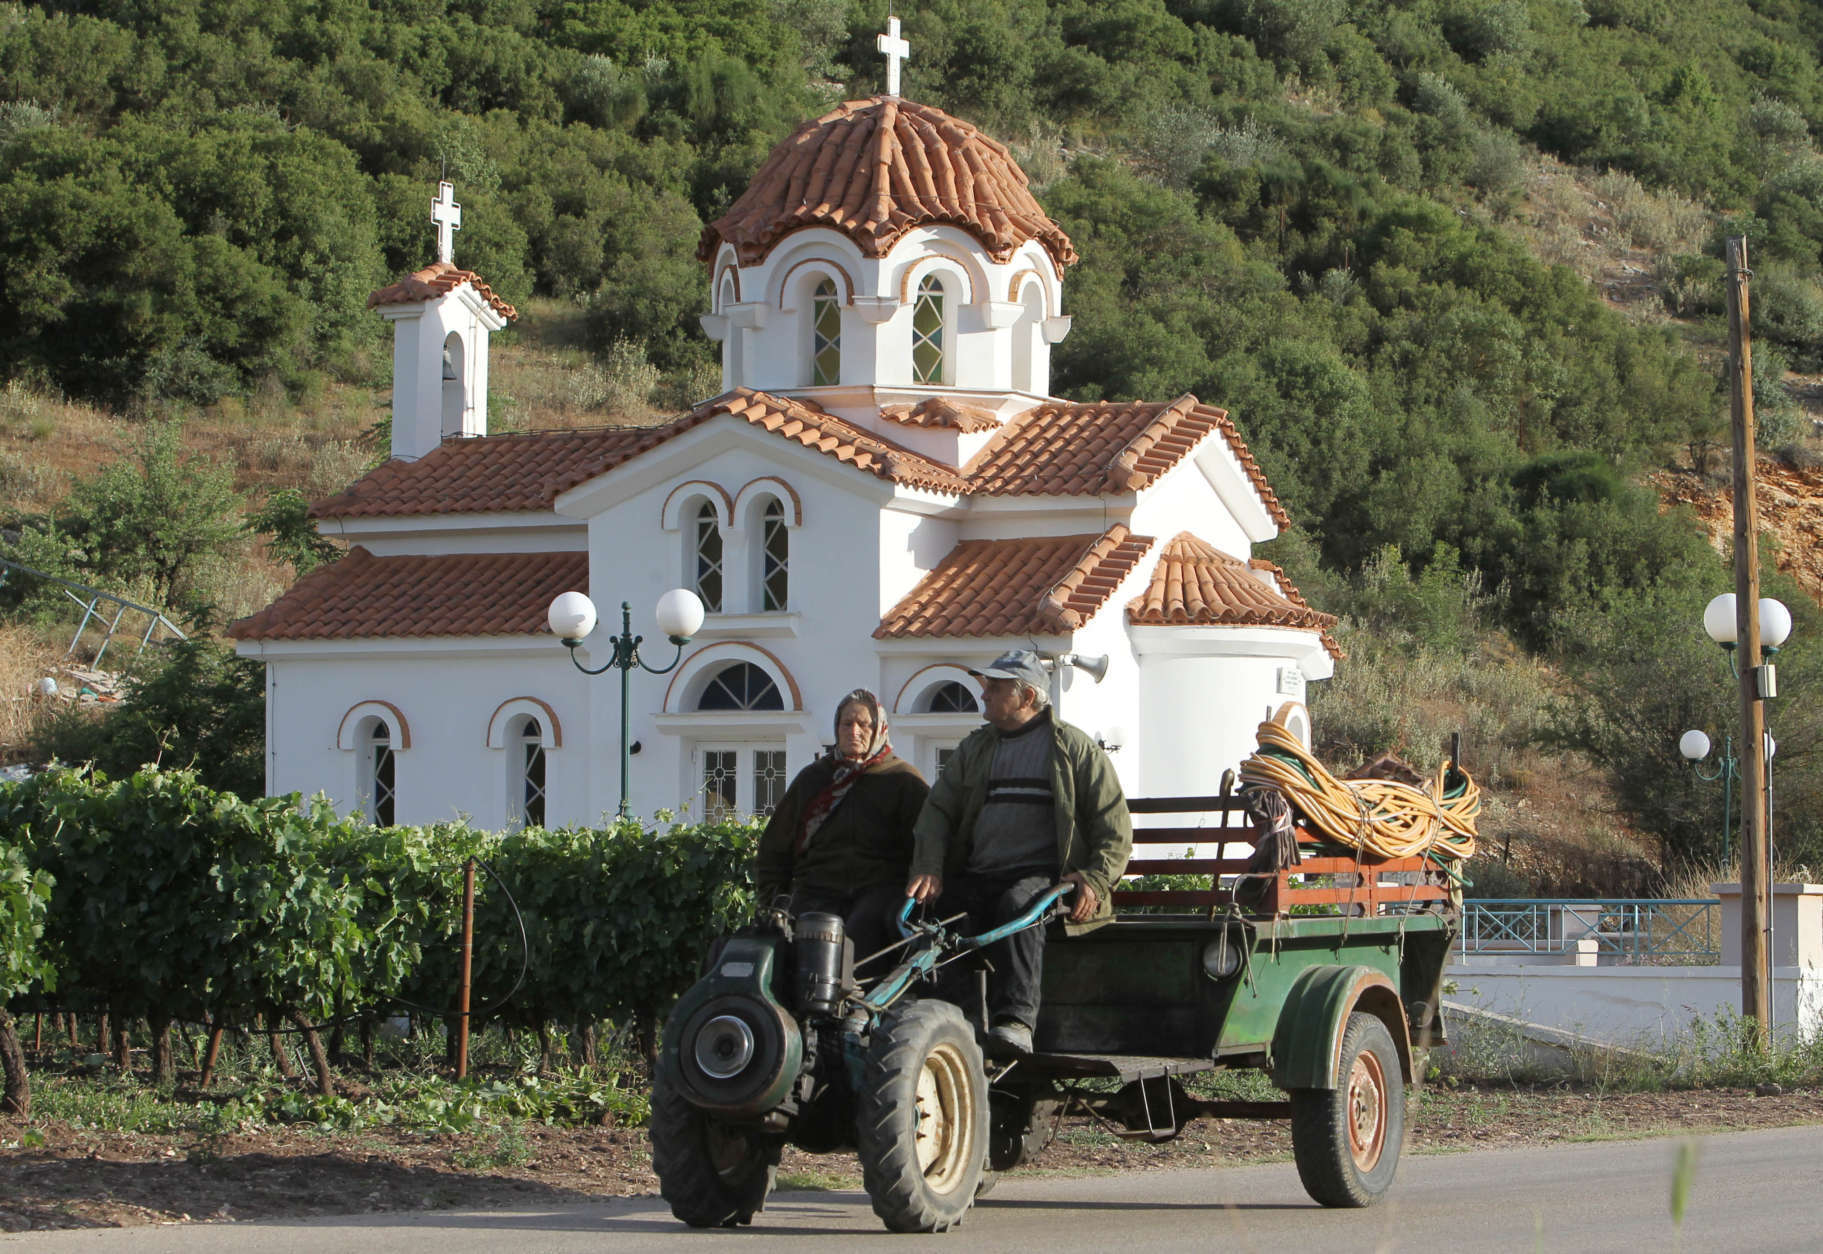 A elderly couple passes a Greek Orthodox with its agricultural machinery next to a vineyard in the town of Nemea about 113 kilometers (70 miles) west of Athens, on Saturday, June 1, 2013. Greece, which is still struggling to stabilize its national debt, is one of the oldest wine-producing regions in the world with the area of Nemea known for the famous red tradition wines. (AP Photo/Thanassis Stavrakis)